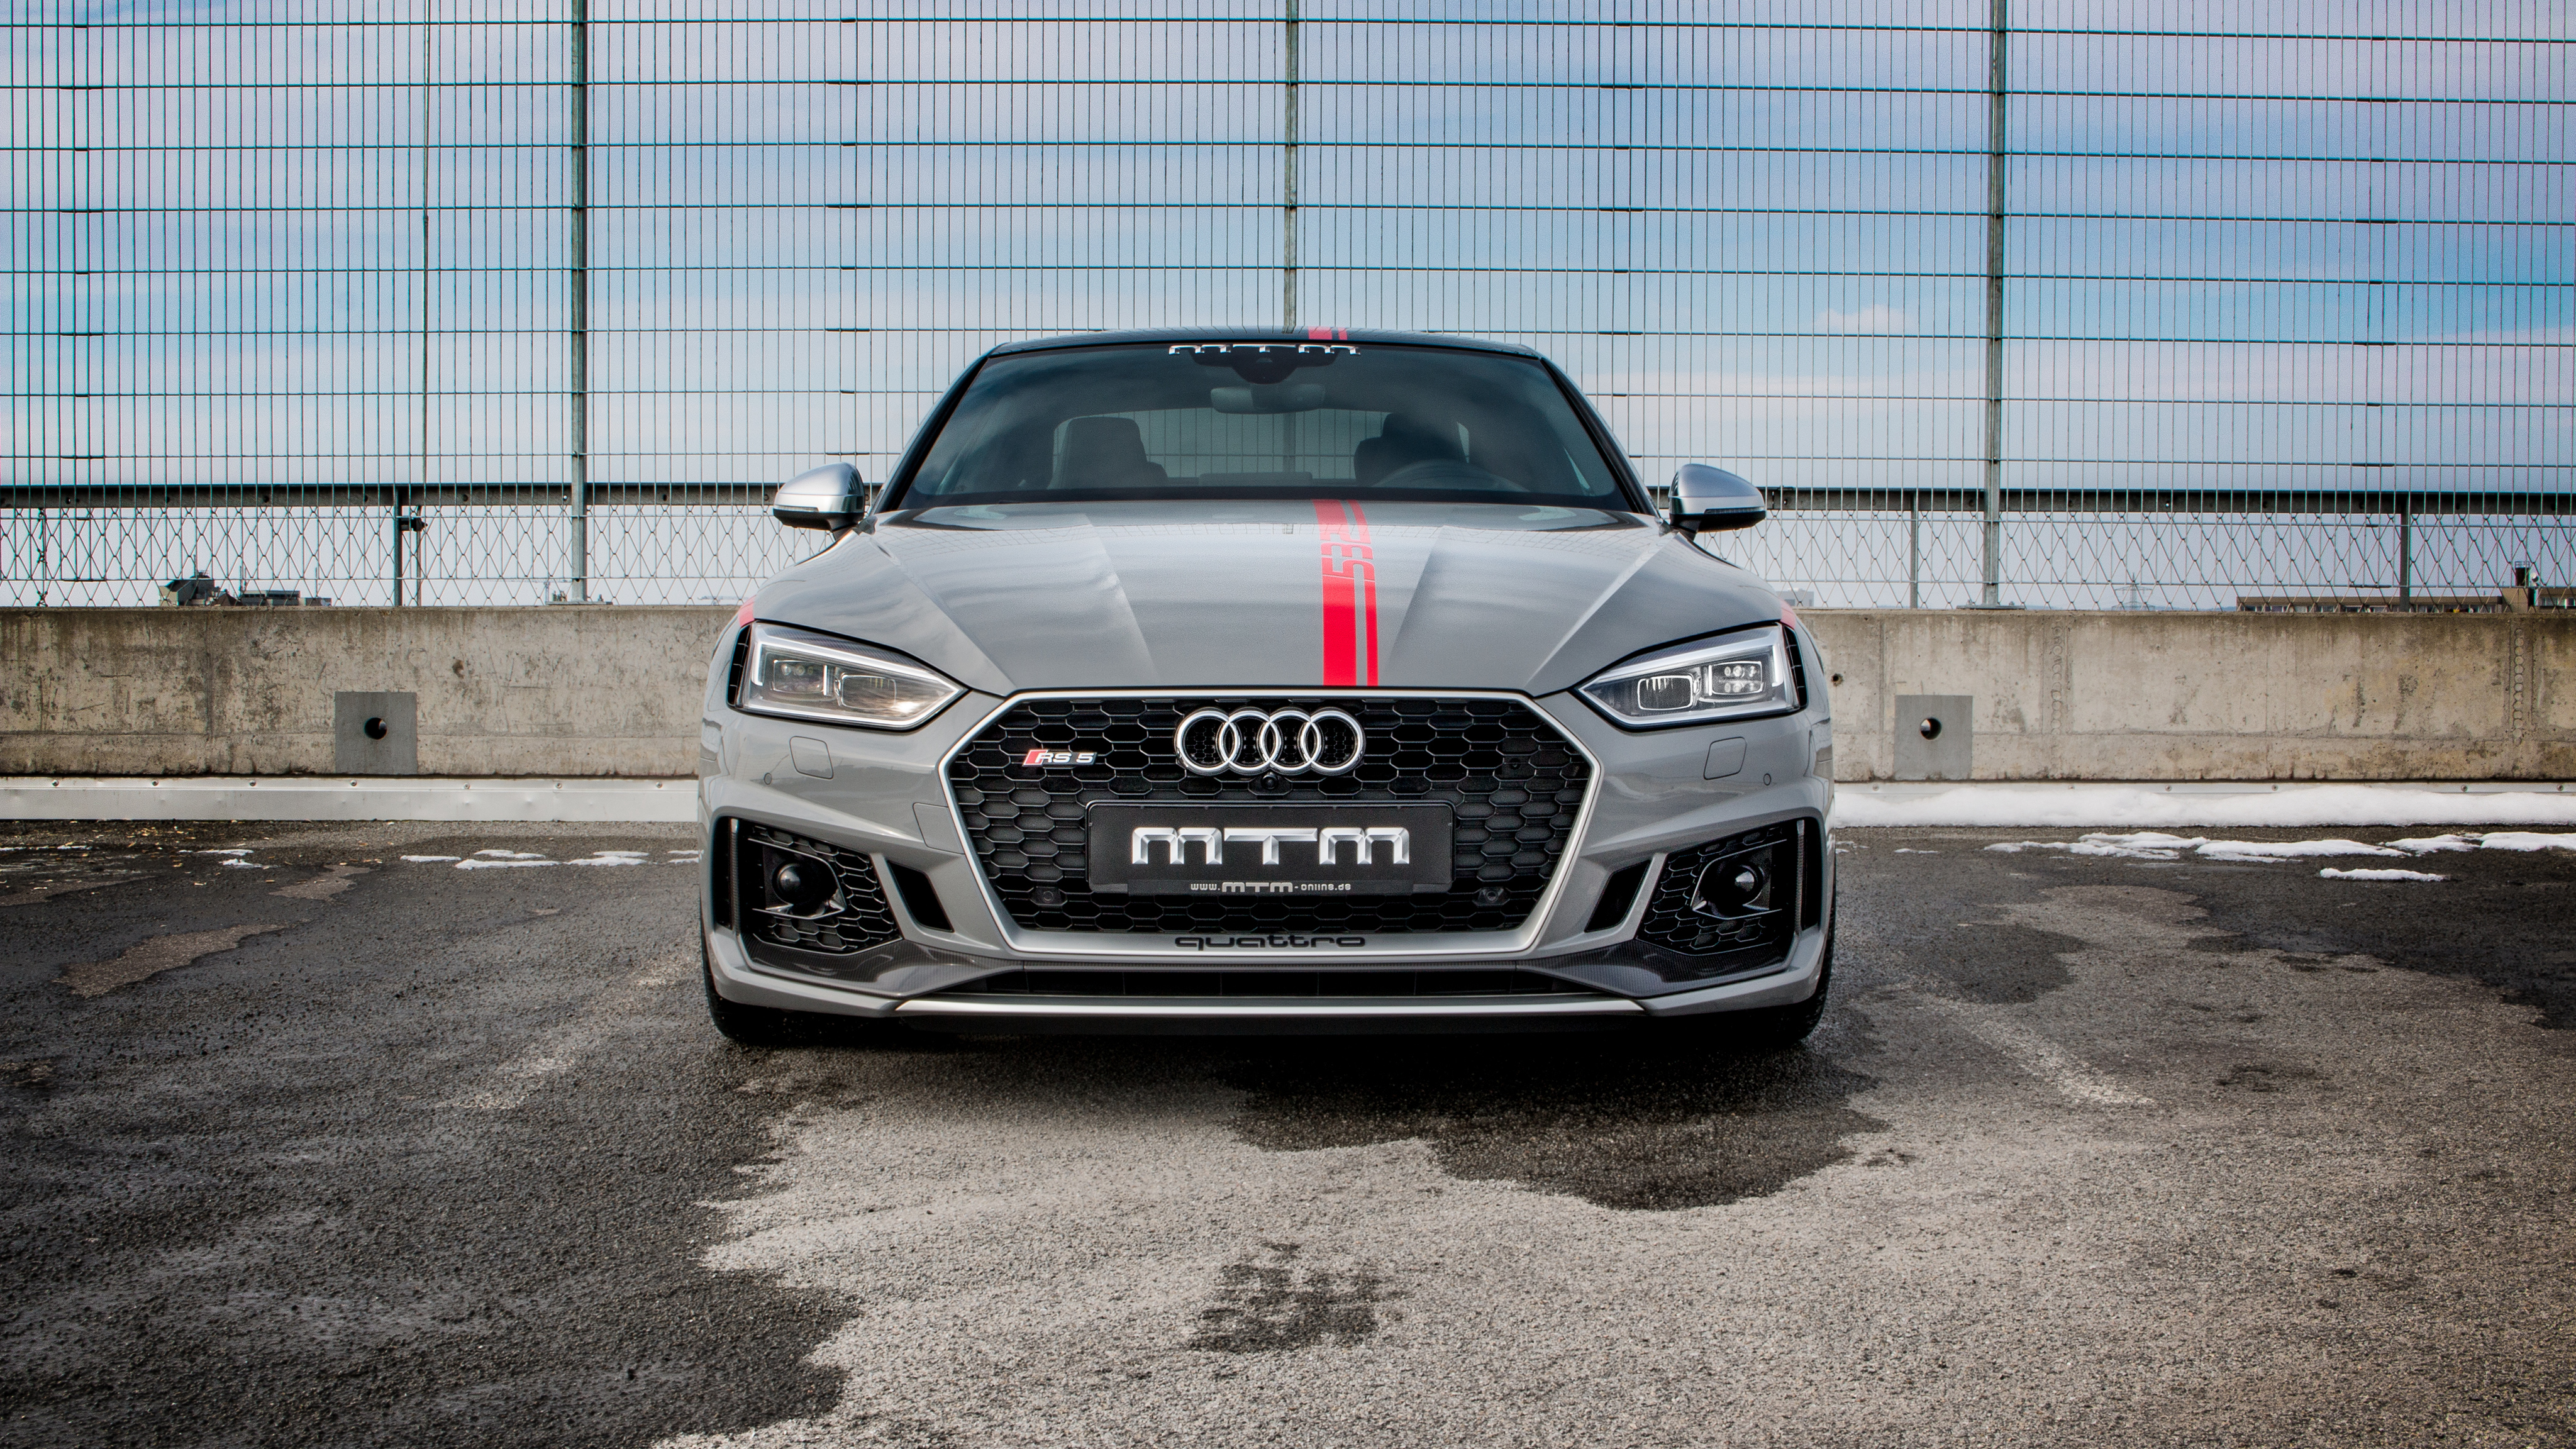 Audi RS 5 Coupe mod specifications